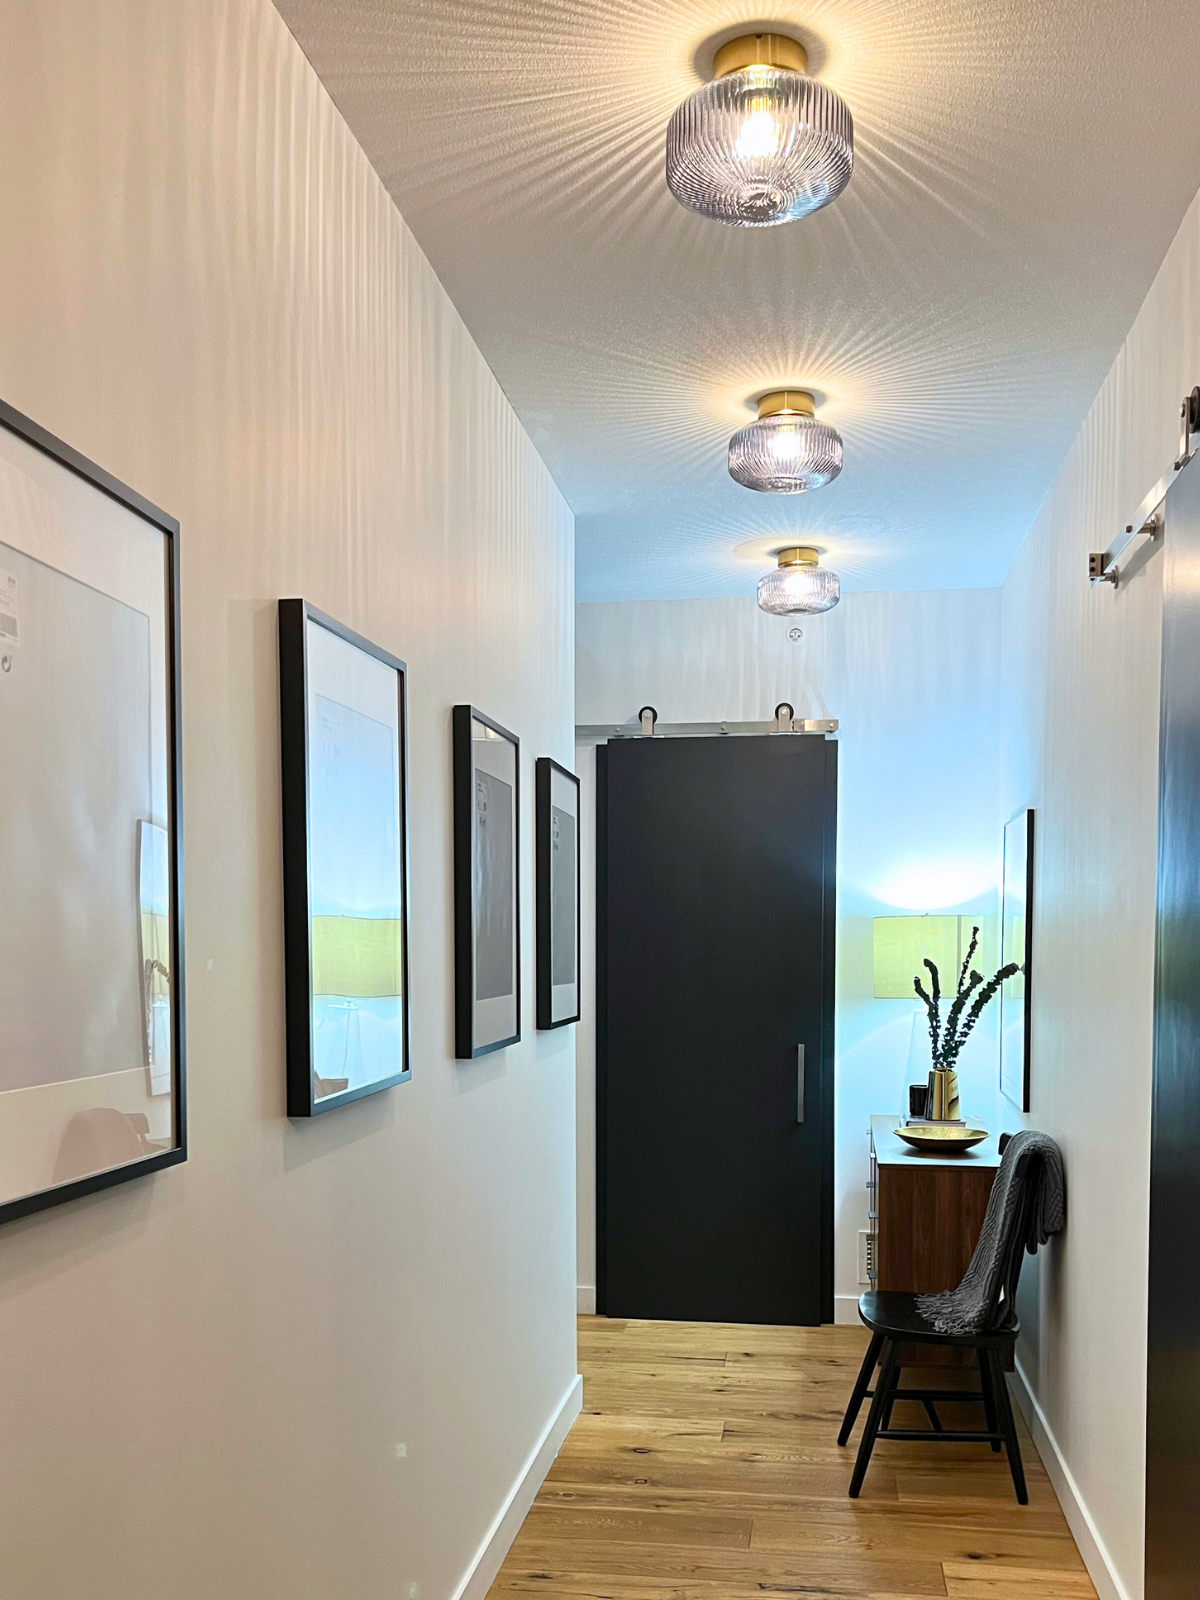 renovated hallway with flush mounted decorative light fixtures, hardwood flooring, white painted walls and black barn doors